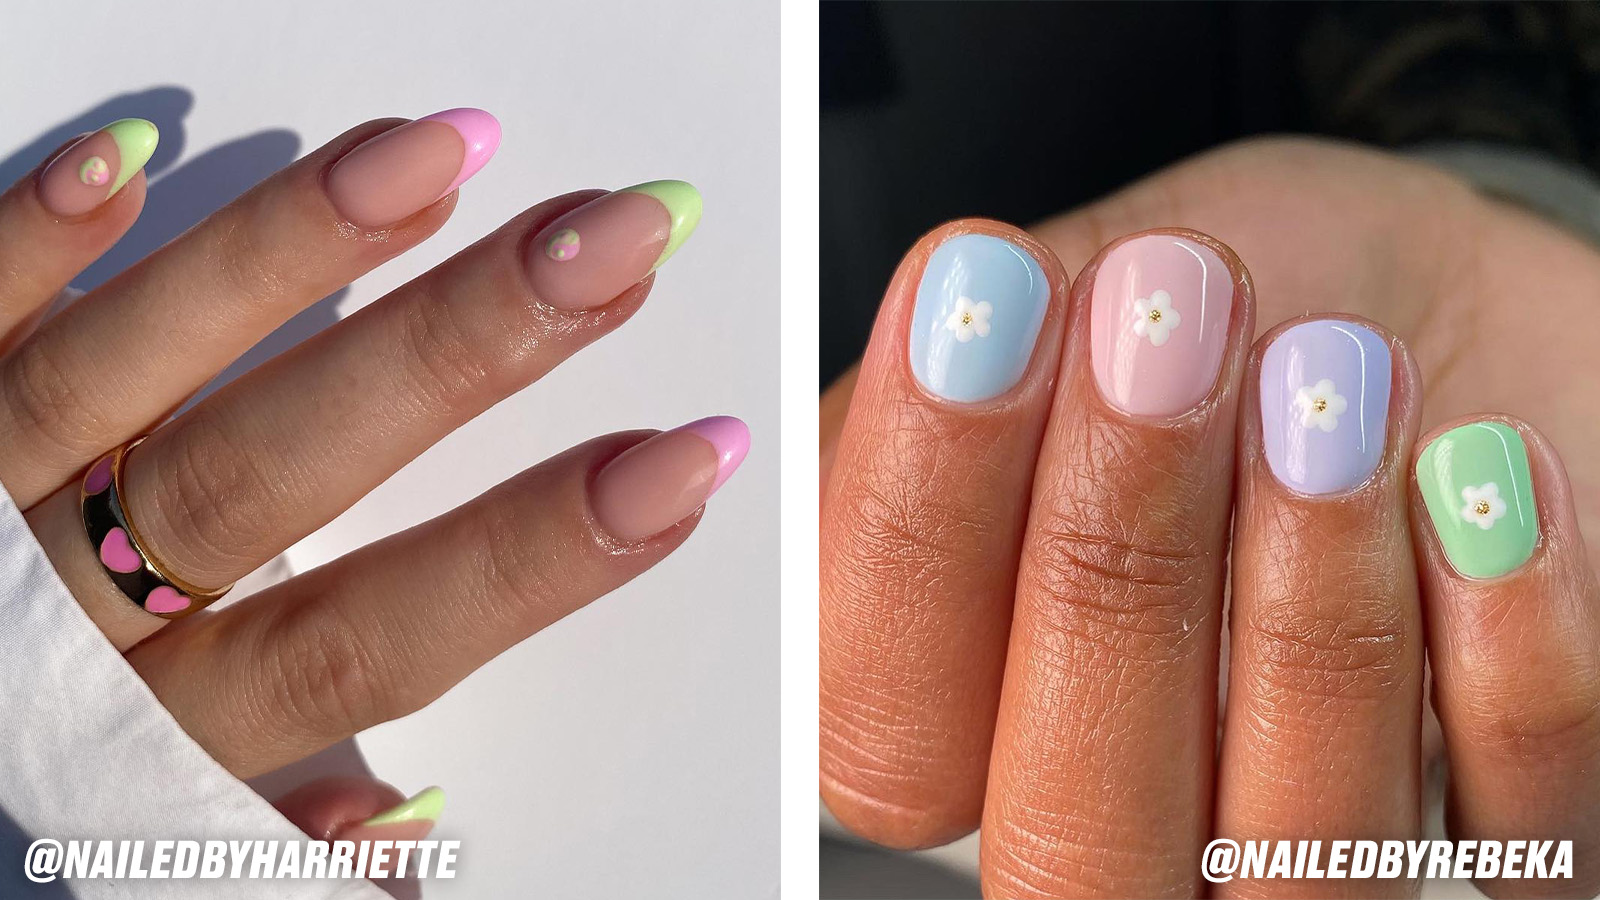 3. Pastel Nail Art Designs for a Soft and Feminine Look - wide 2